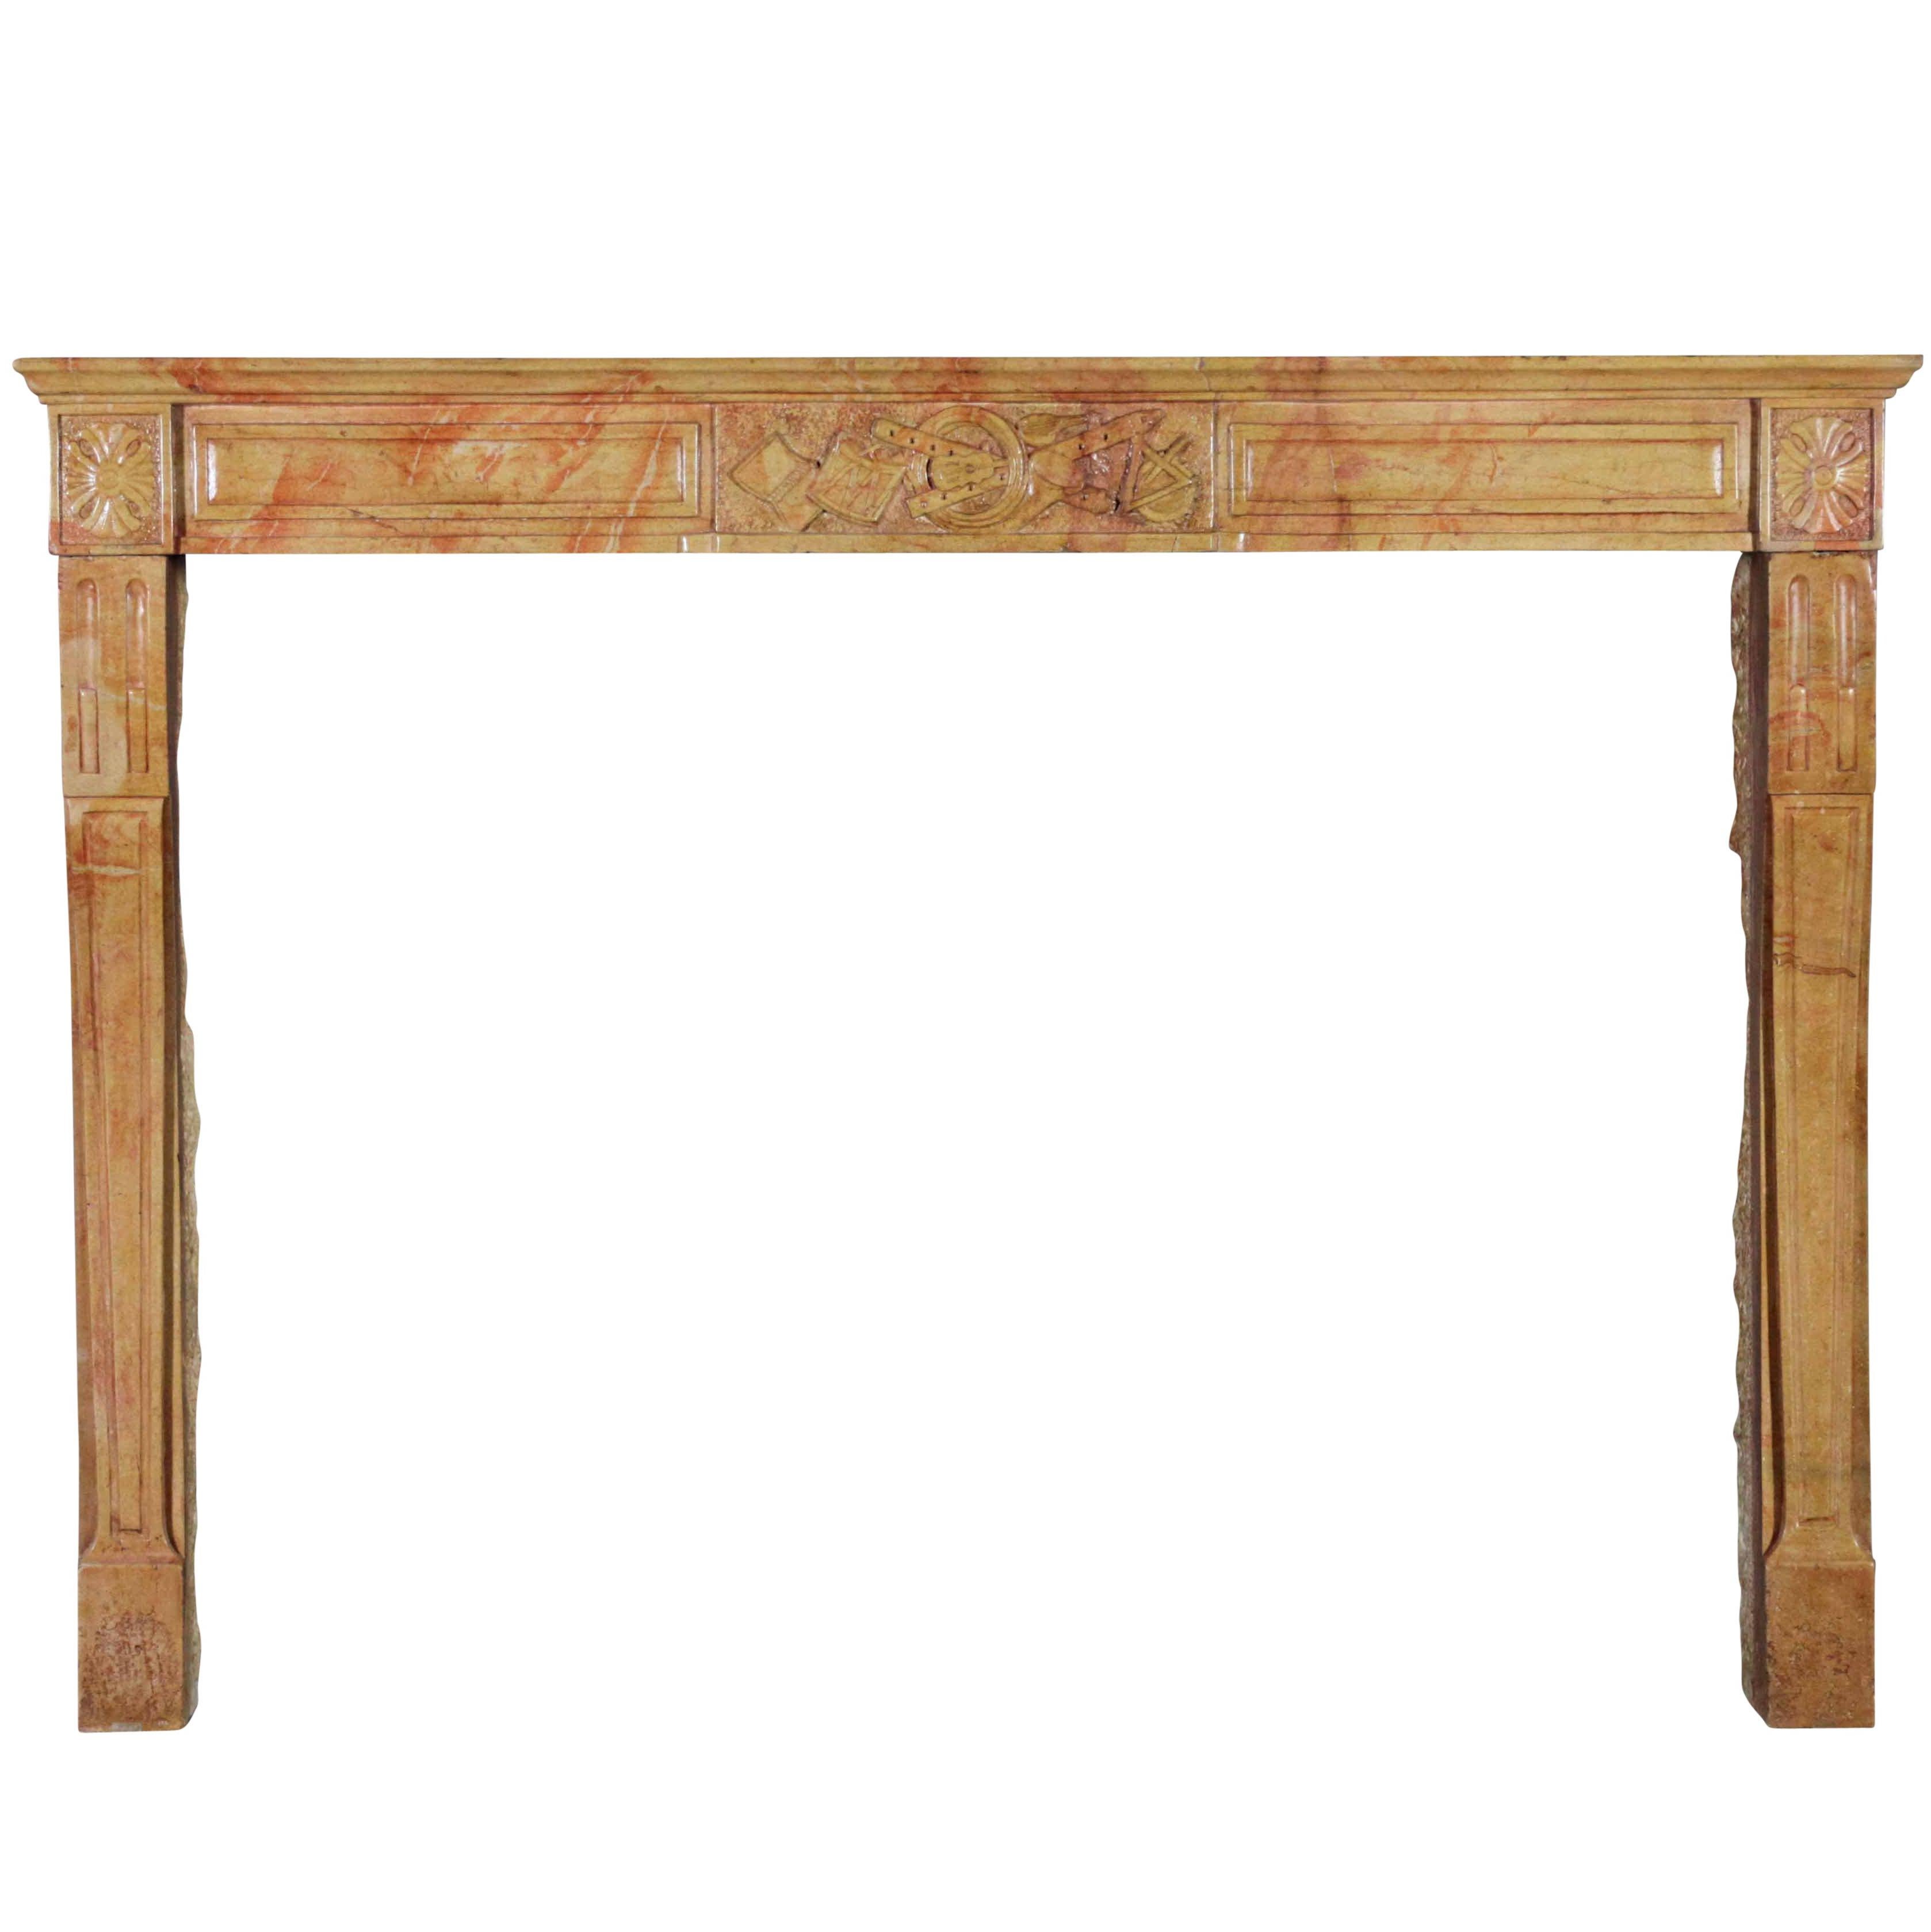 Fine Bicolor Marble Stone French Antique Fireplace Surround For Sale 12